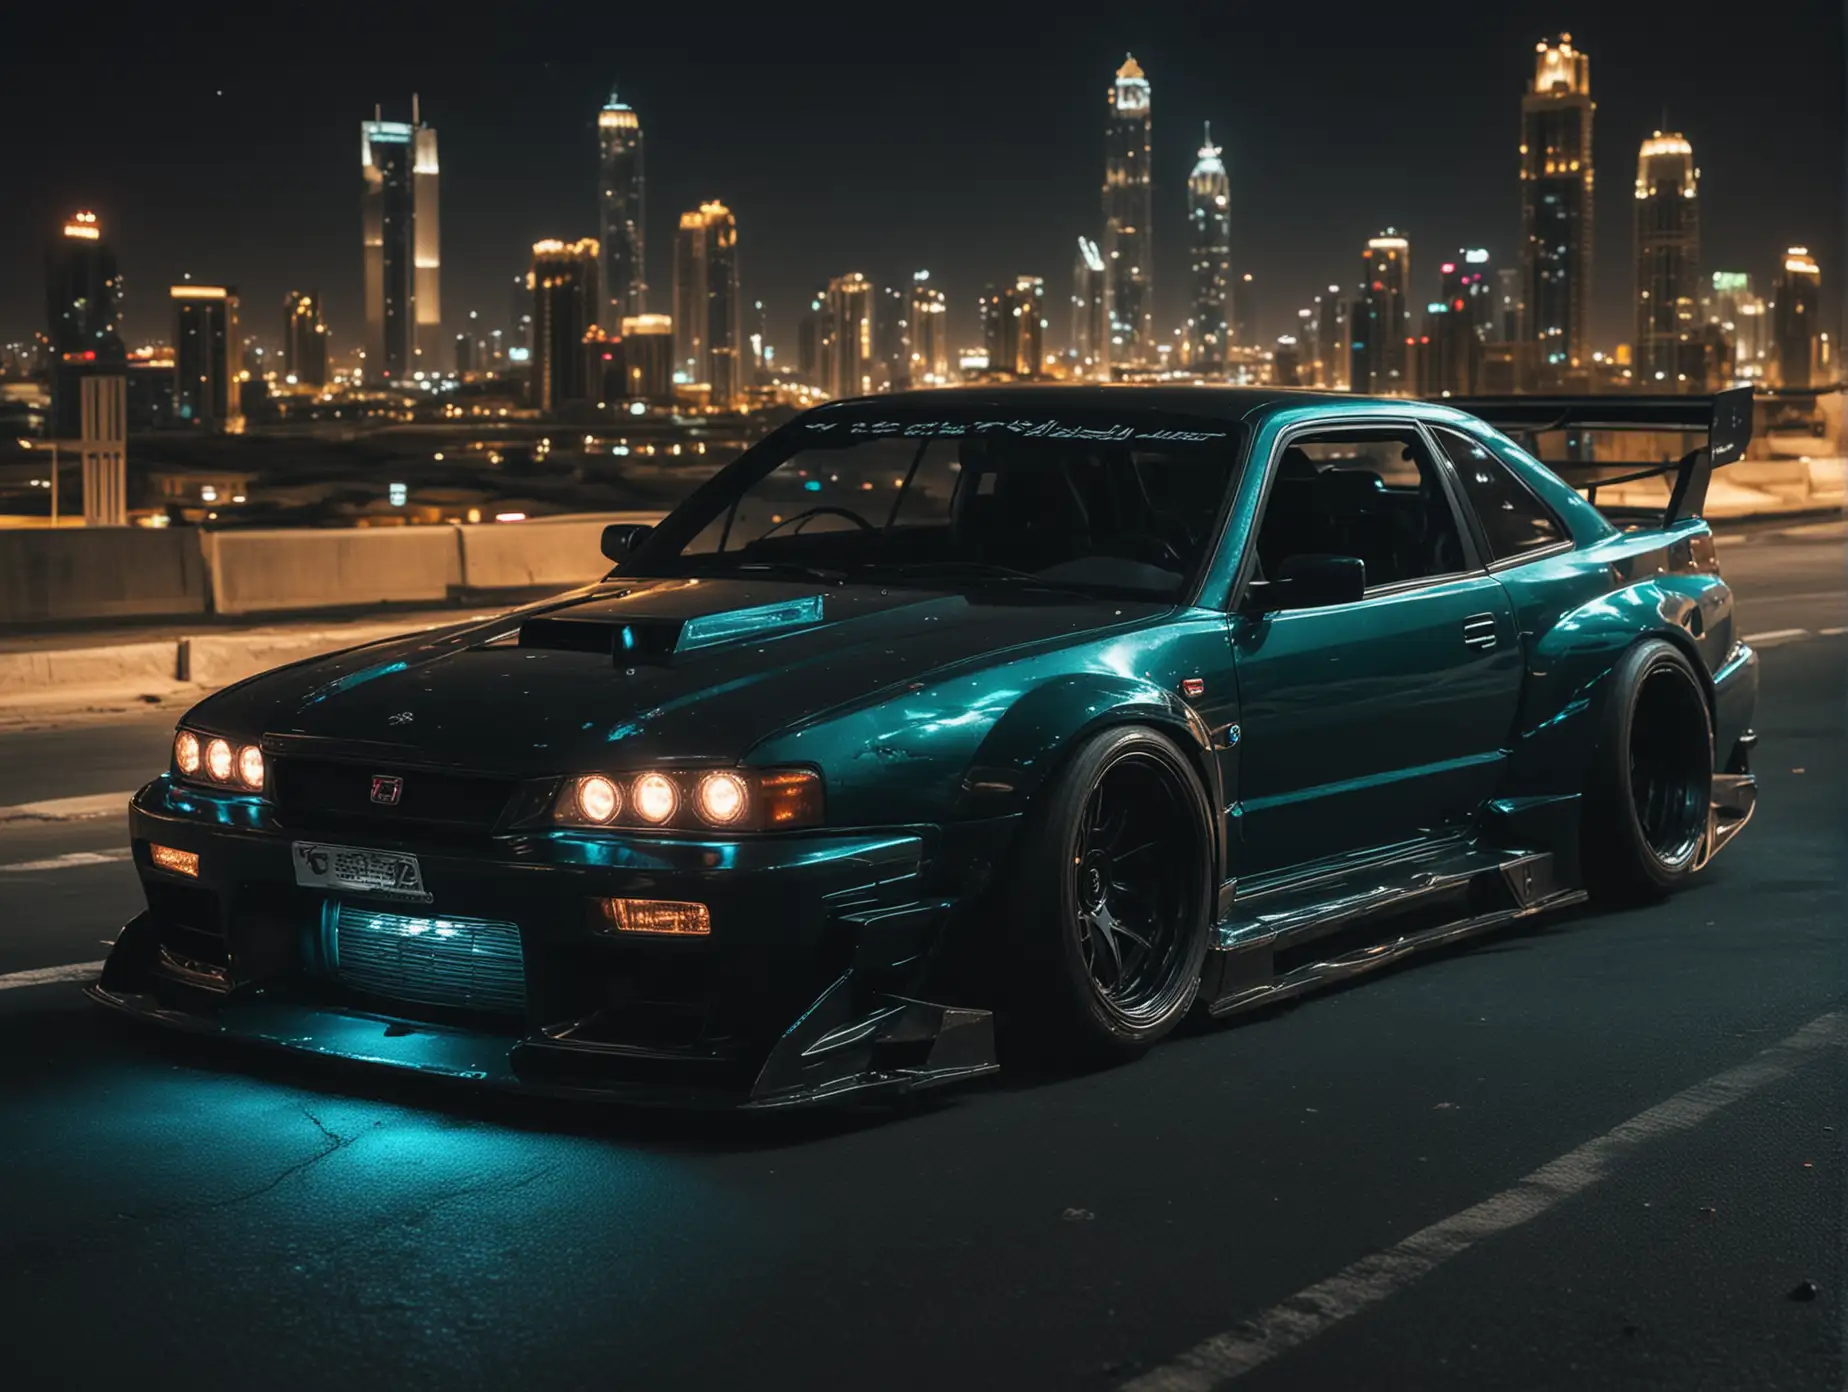 Create Japanese drifting cars from Dark Angel, Evil Tuning type, Downhill in the city of Dubai drifting at night, rear view from high far away, car color dark black, dark turquoise and violent car lights.